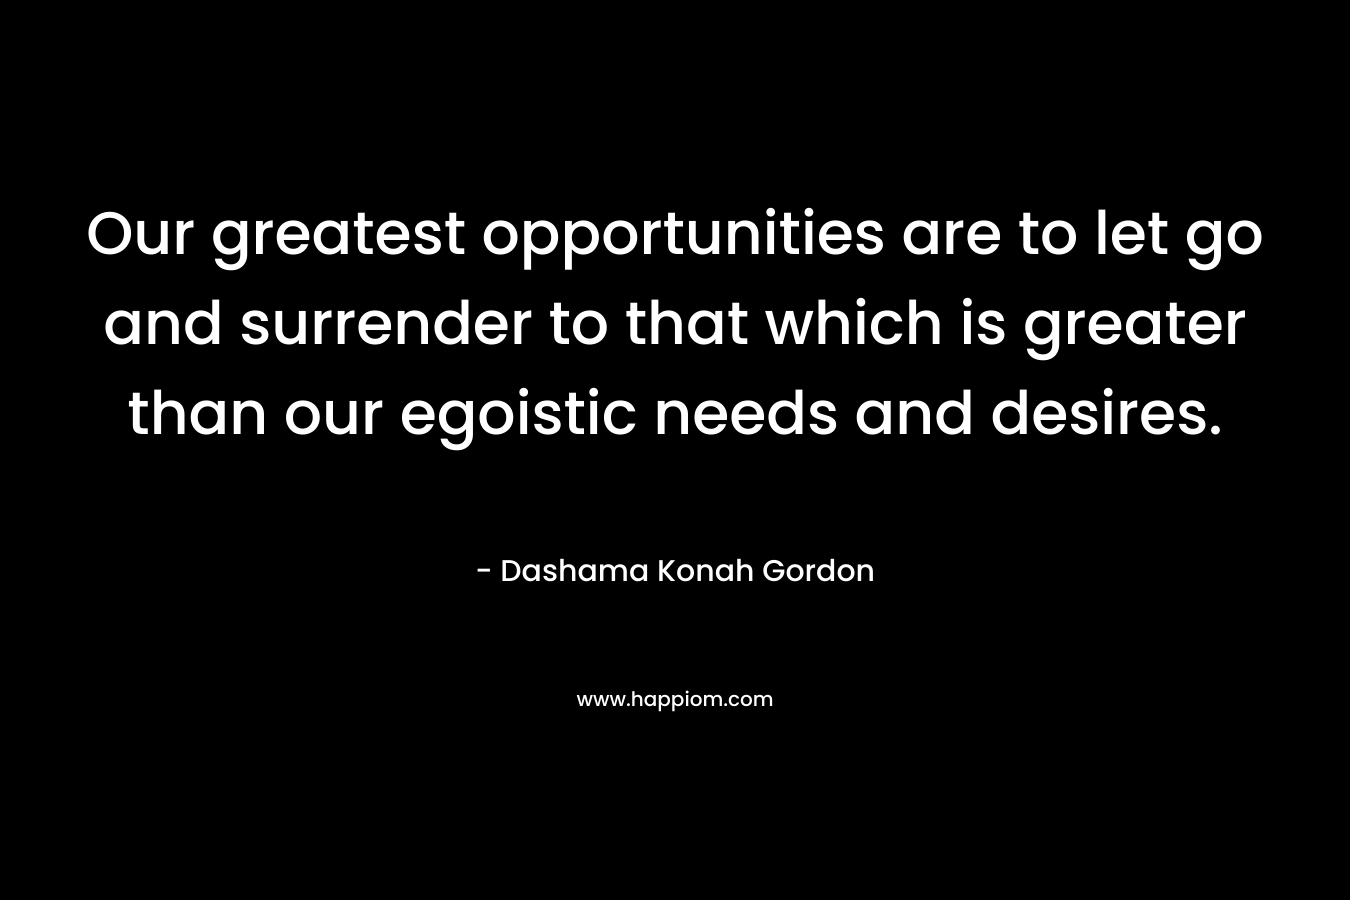 Our greatest opportunities are to let go and surrender to that which is greater than our egoistic needs and desires.